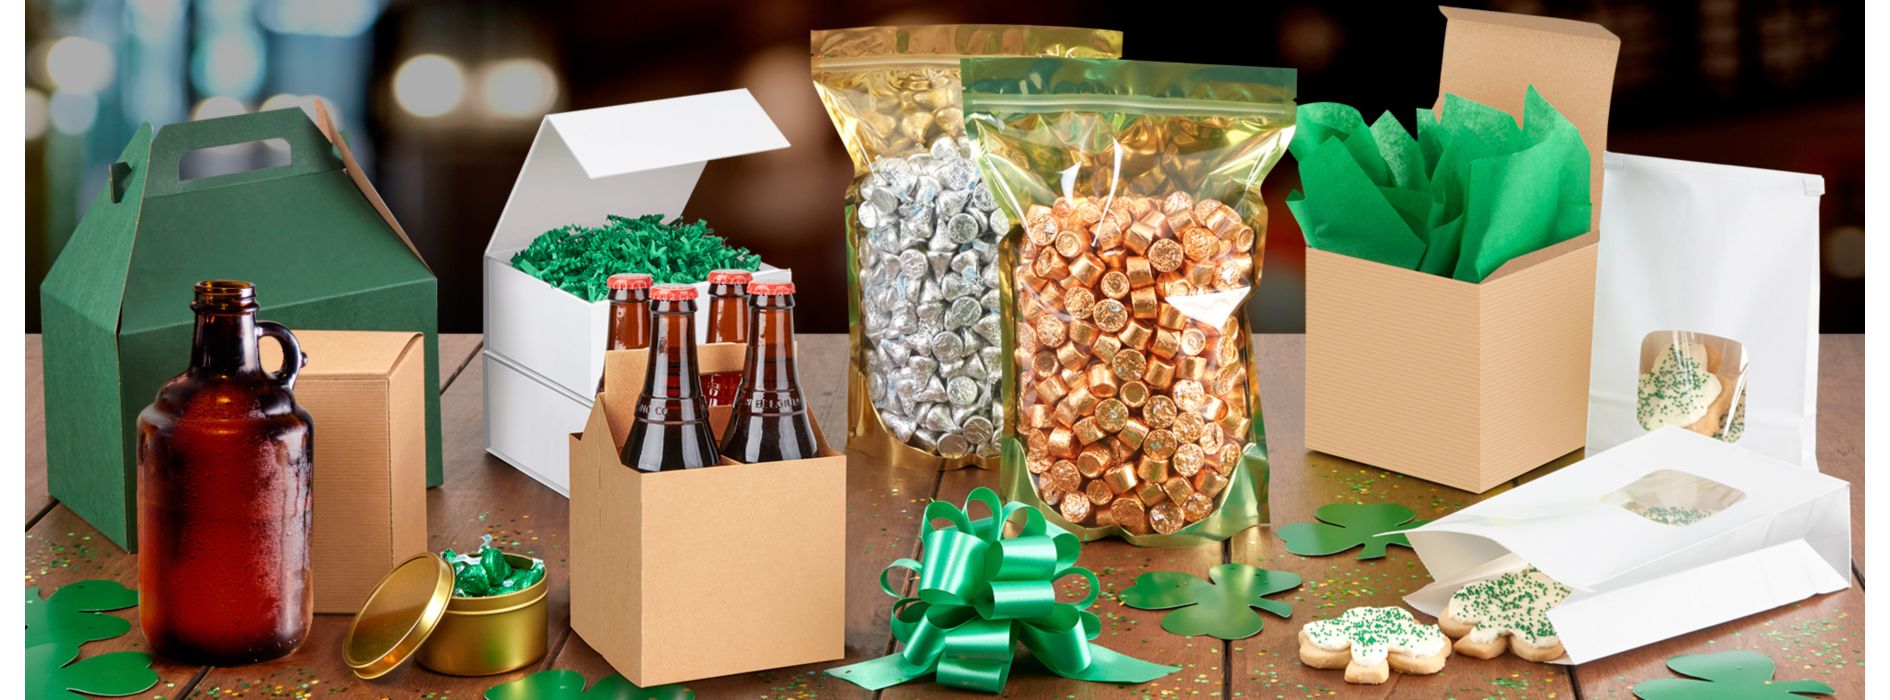 St. Patrick's Day Packaging